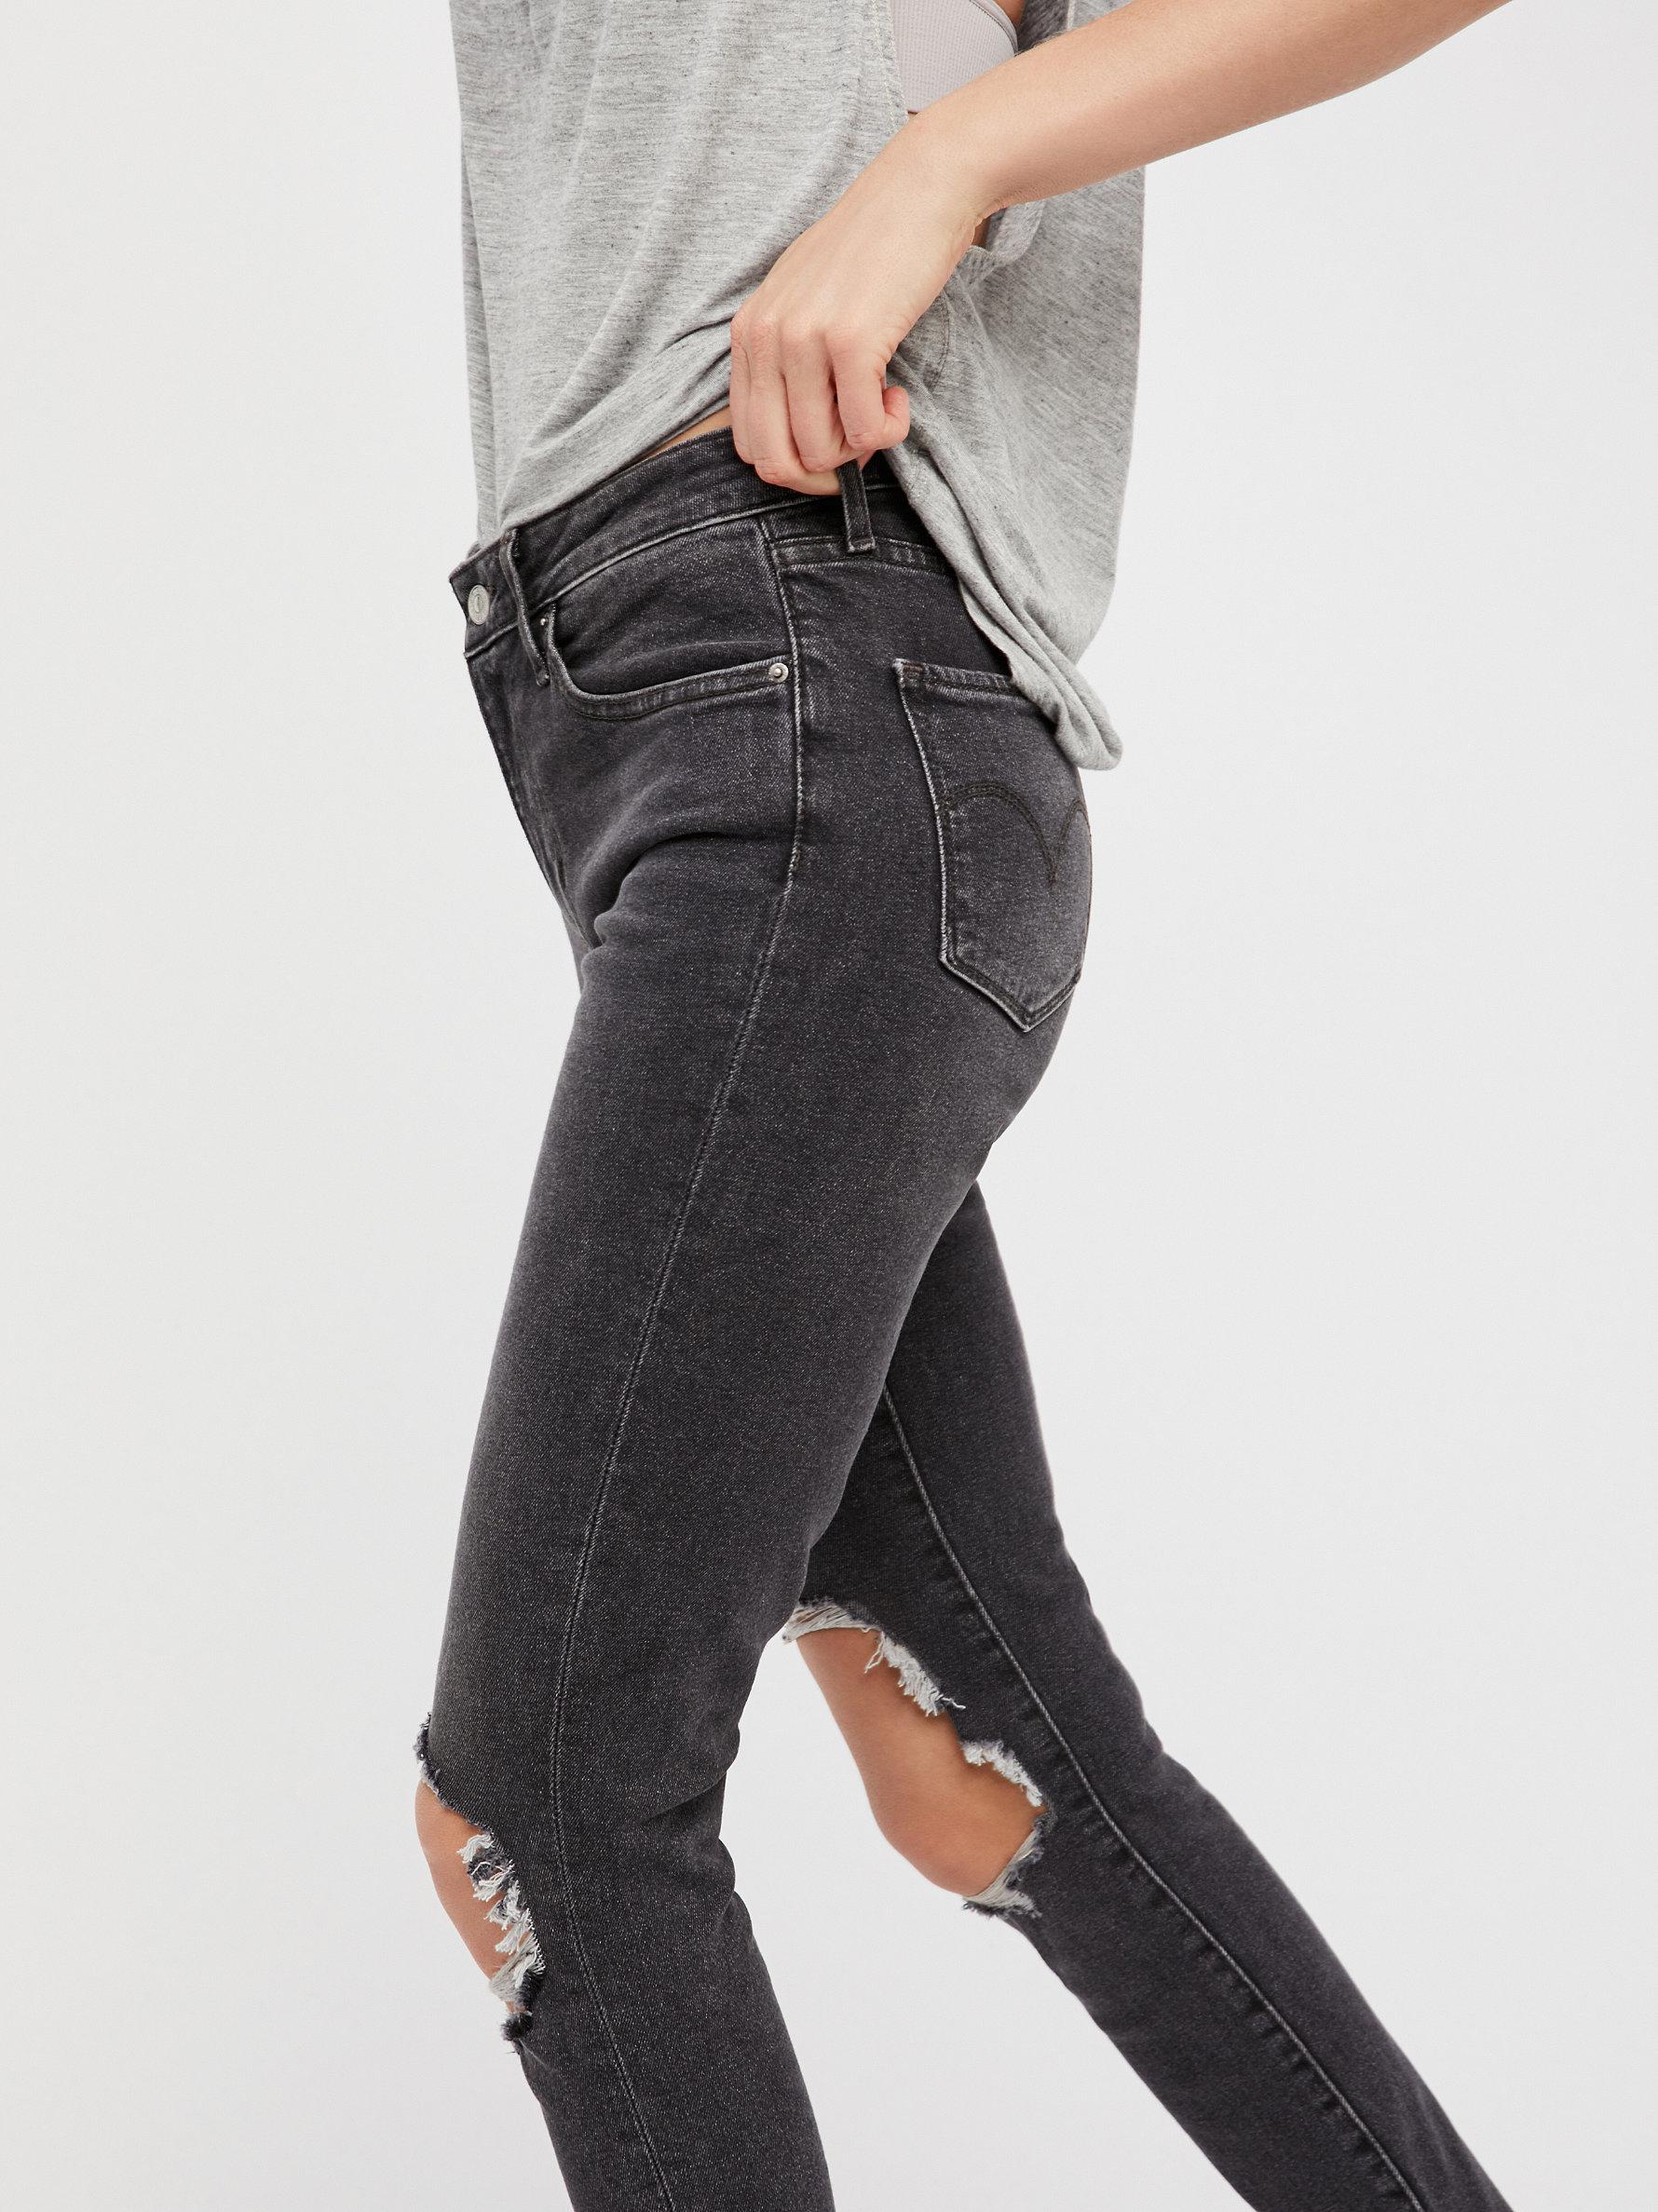 Free People Levi's 721 High Rise Skinny Jeans in Black | Lyst Canada